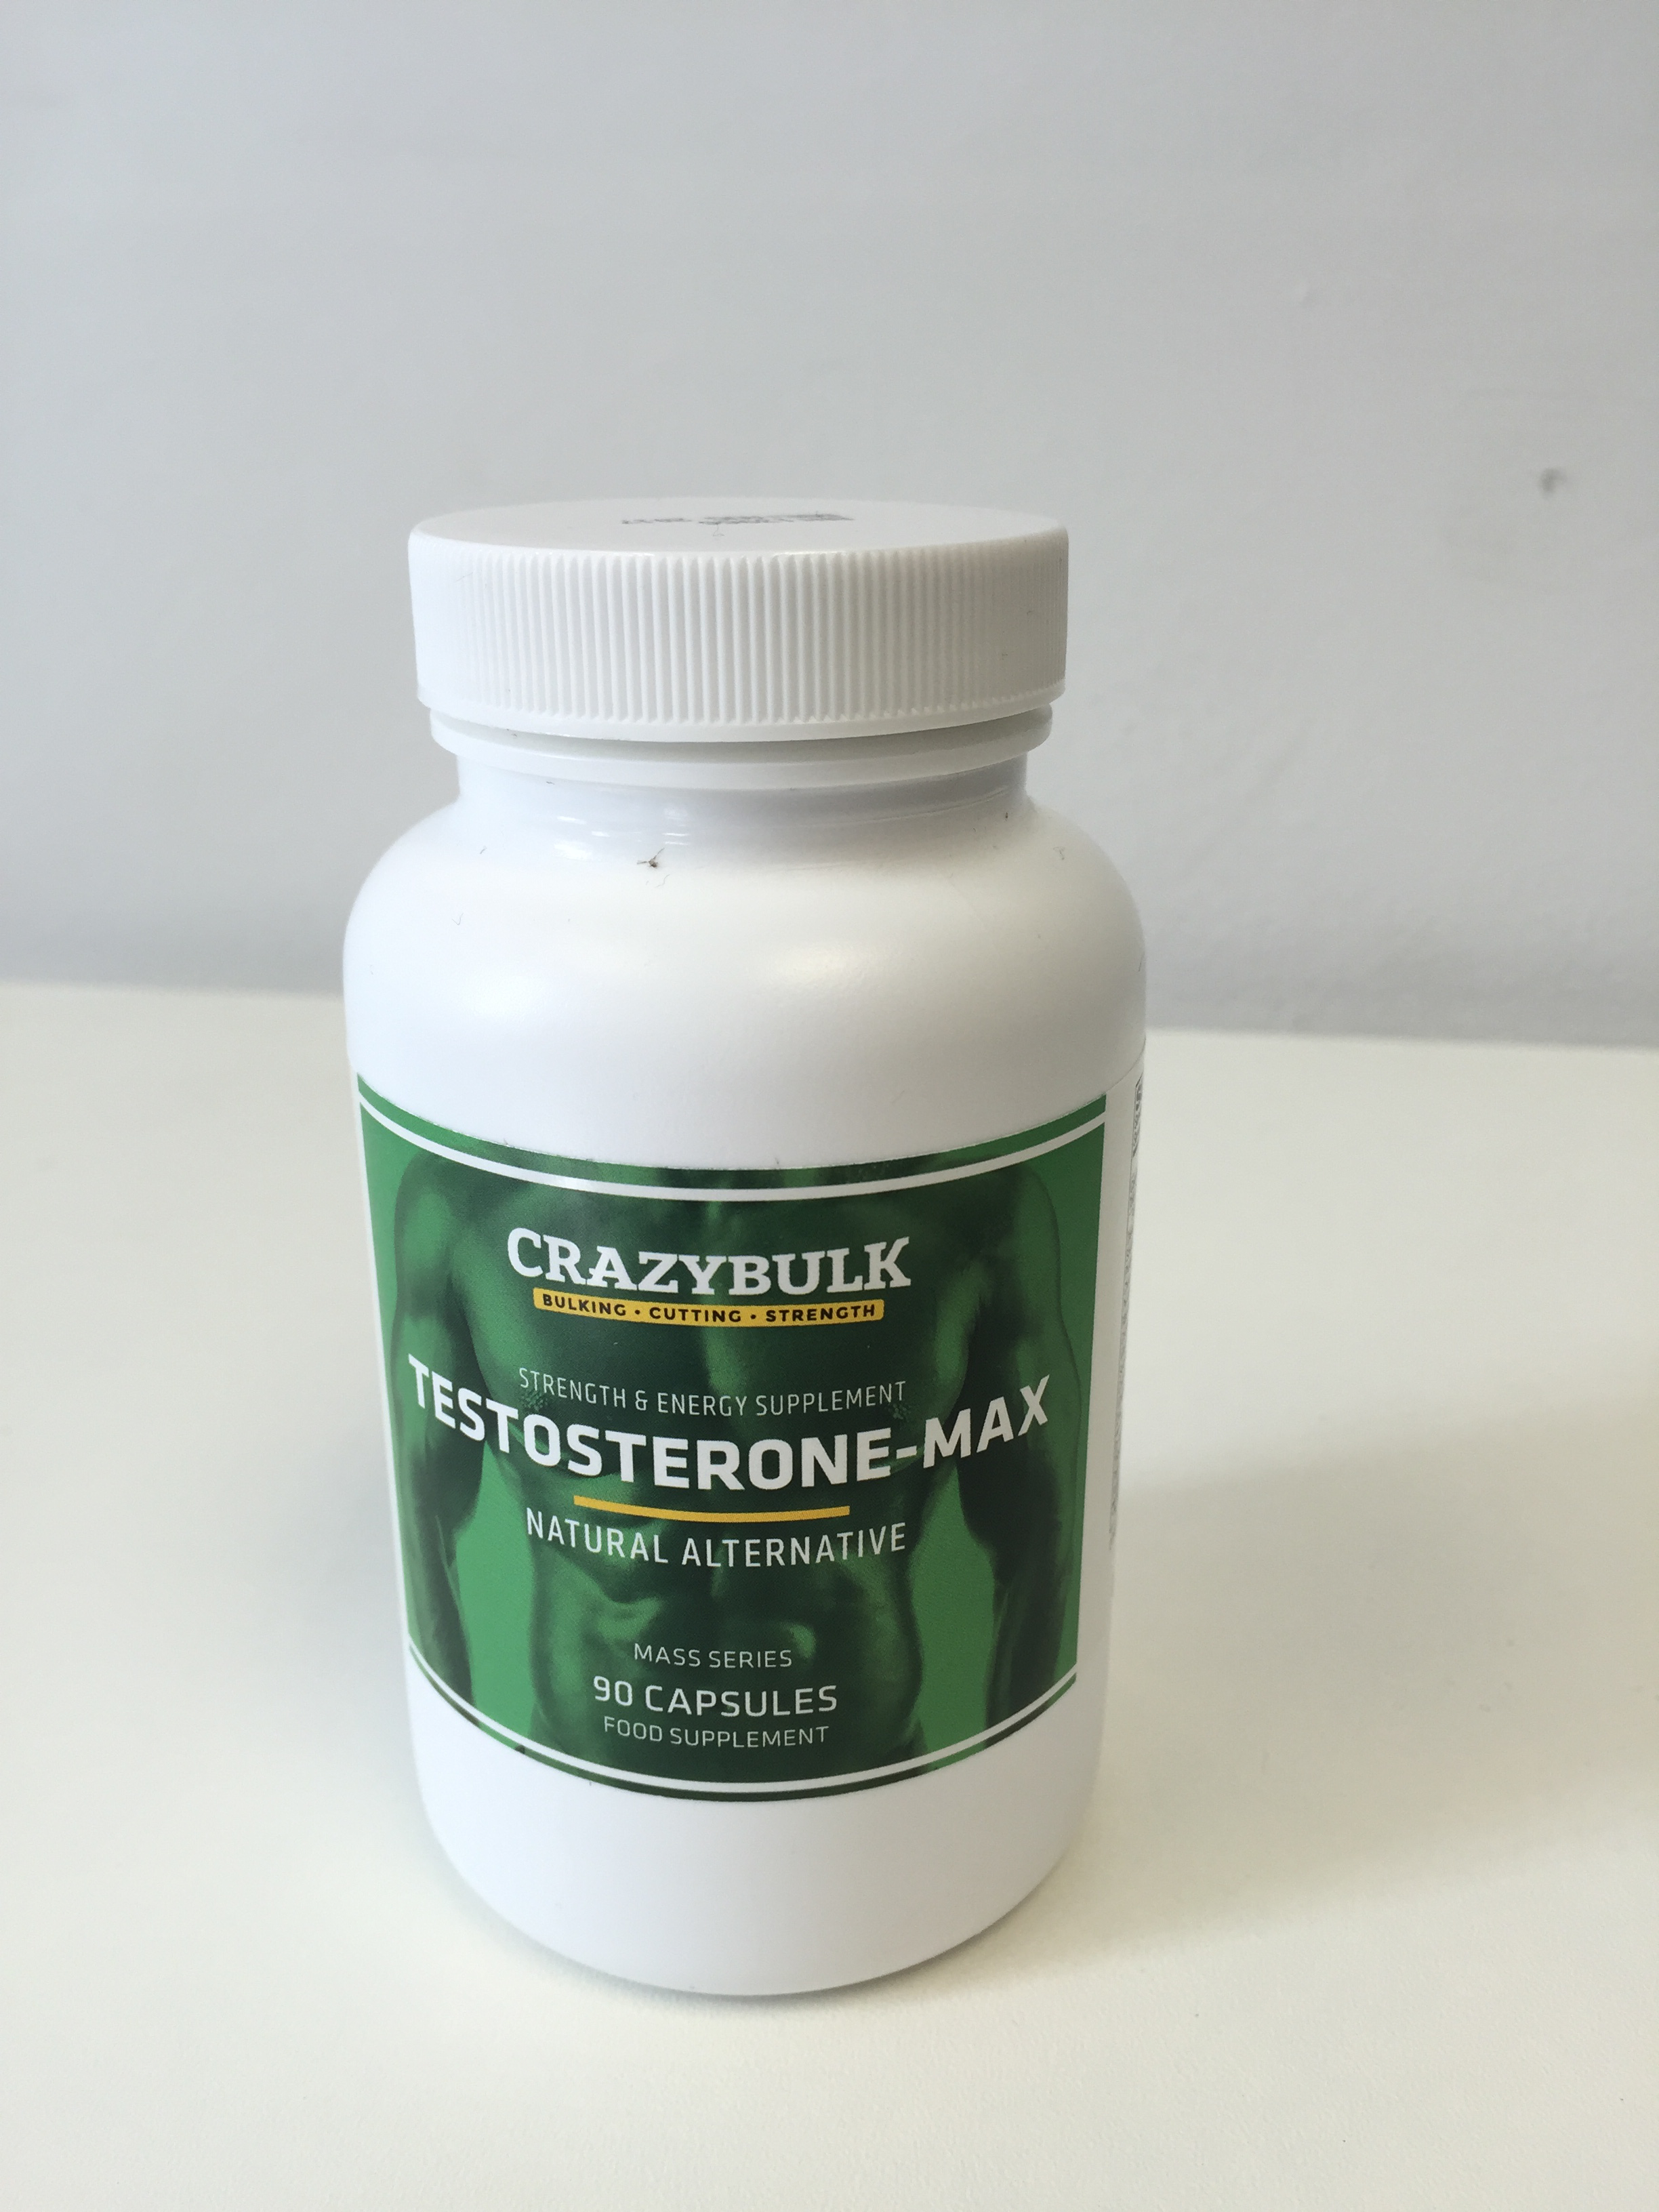 Clenbuterol for sale in mexico